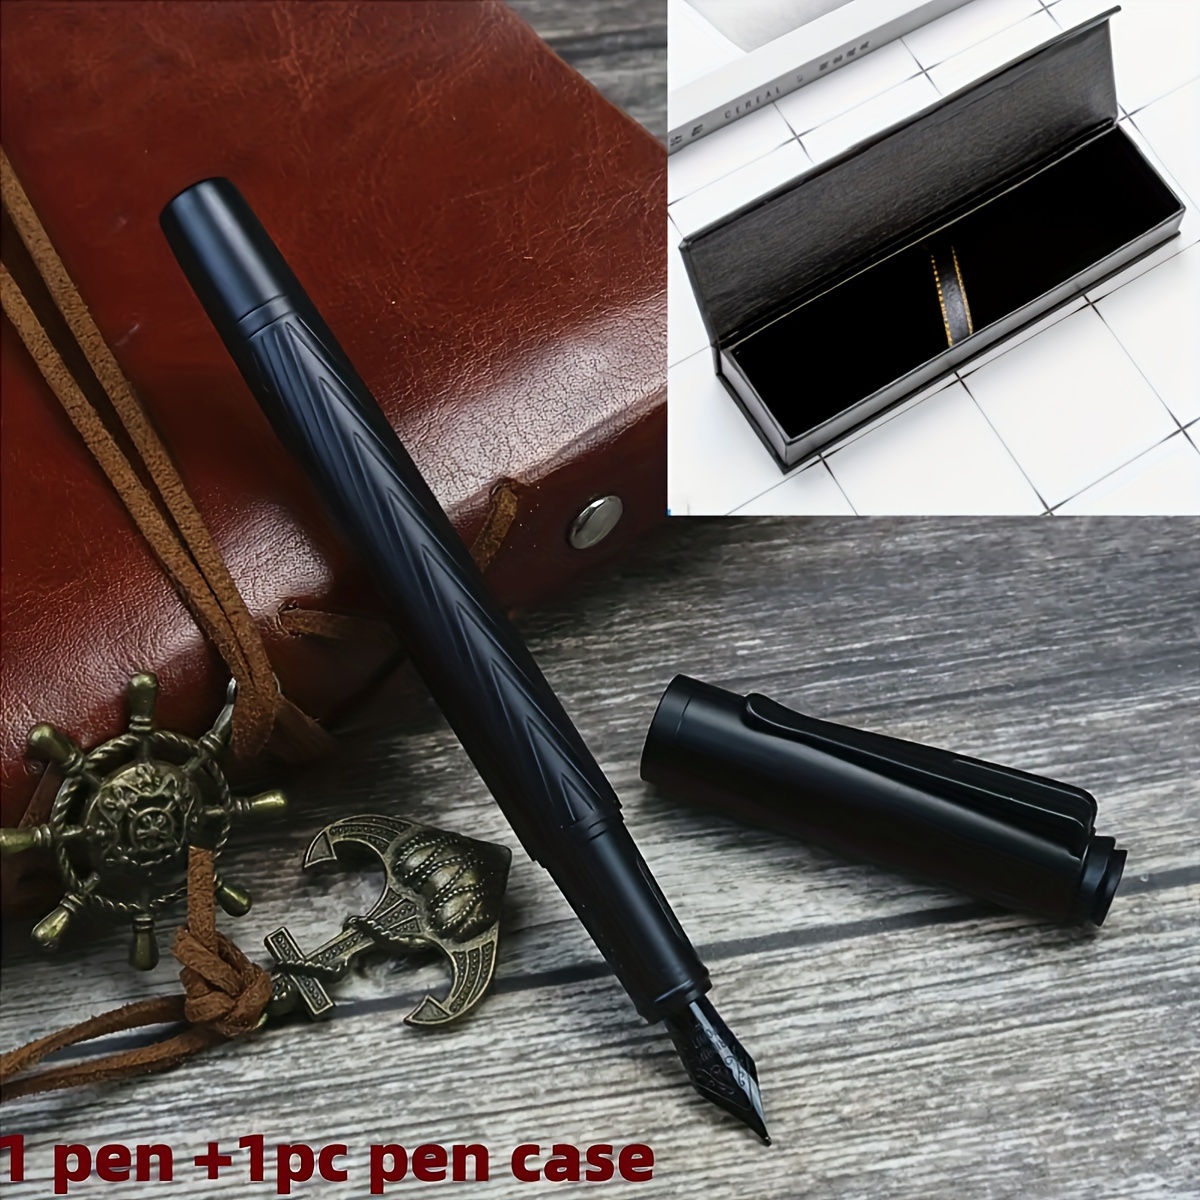 

Black Samurai Metal Fountain Pen With Titanium Medium Point Nib And Click-off Cap, Smooth Writing Ink Pen For Office And School, Includes 1 Pen With 1 Pen Case